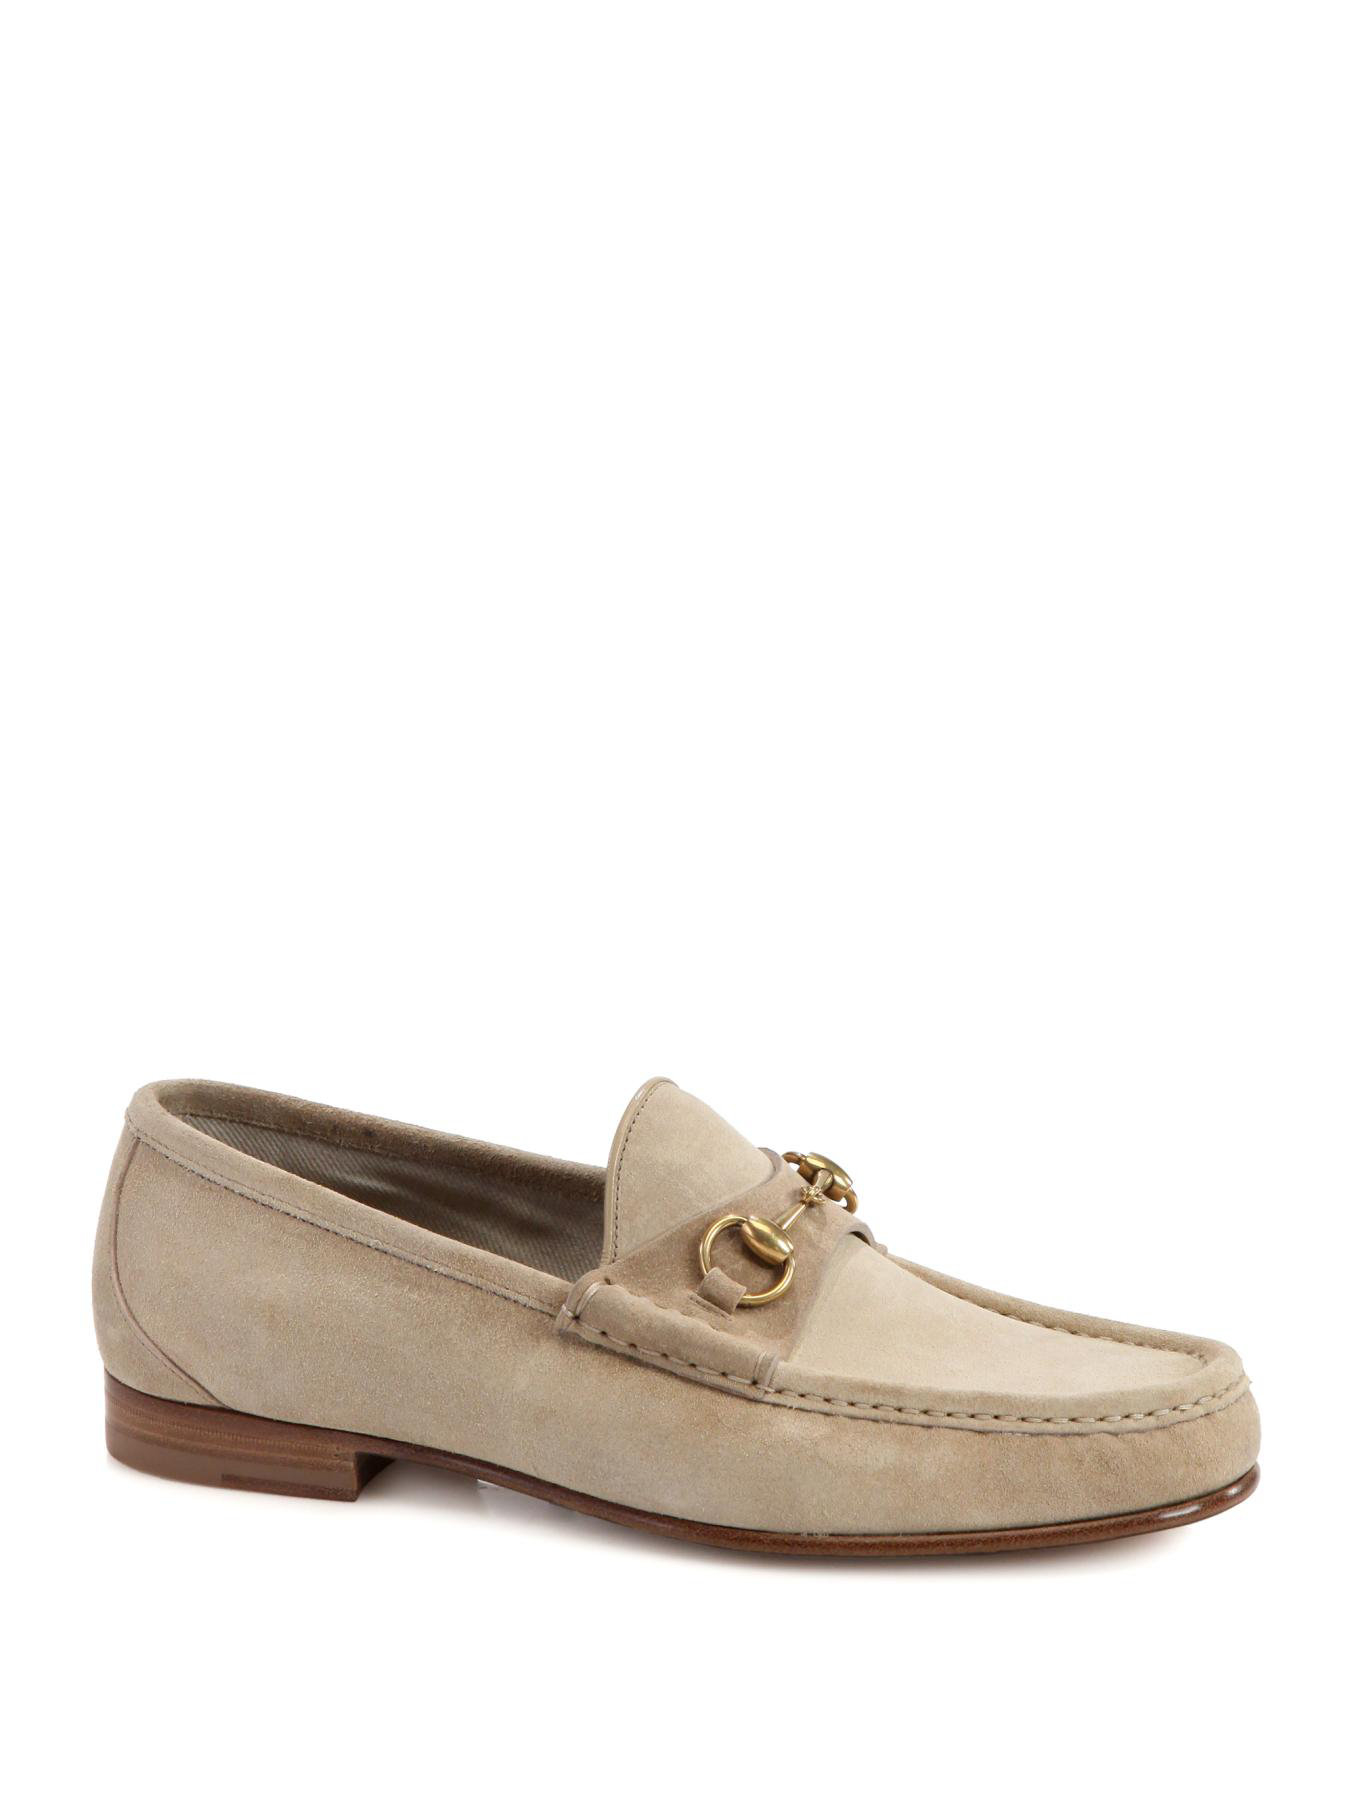 Gucci Roos Suede Horsebit Loafers in Cream (Natural) for Men | Lyst